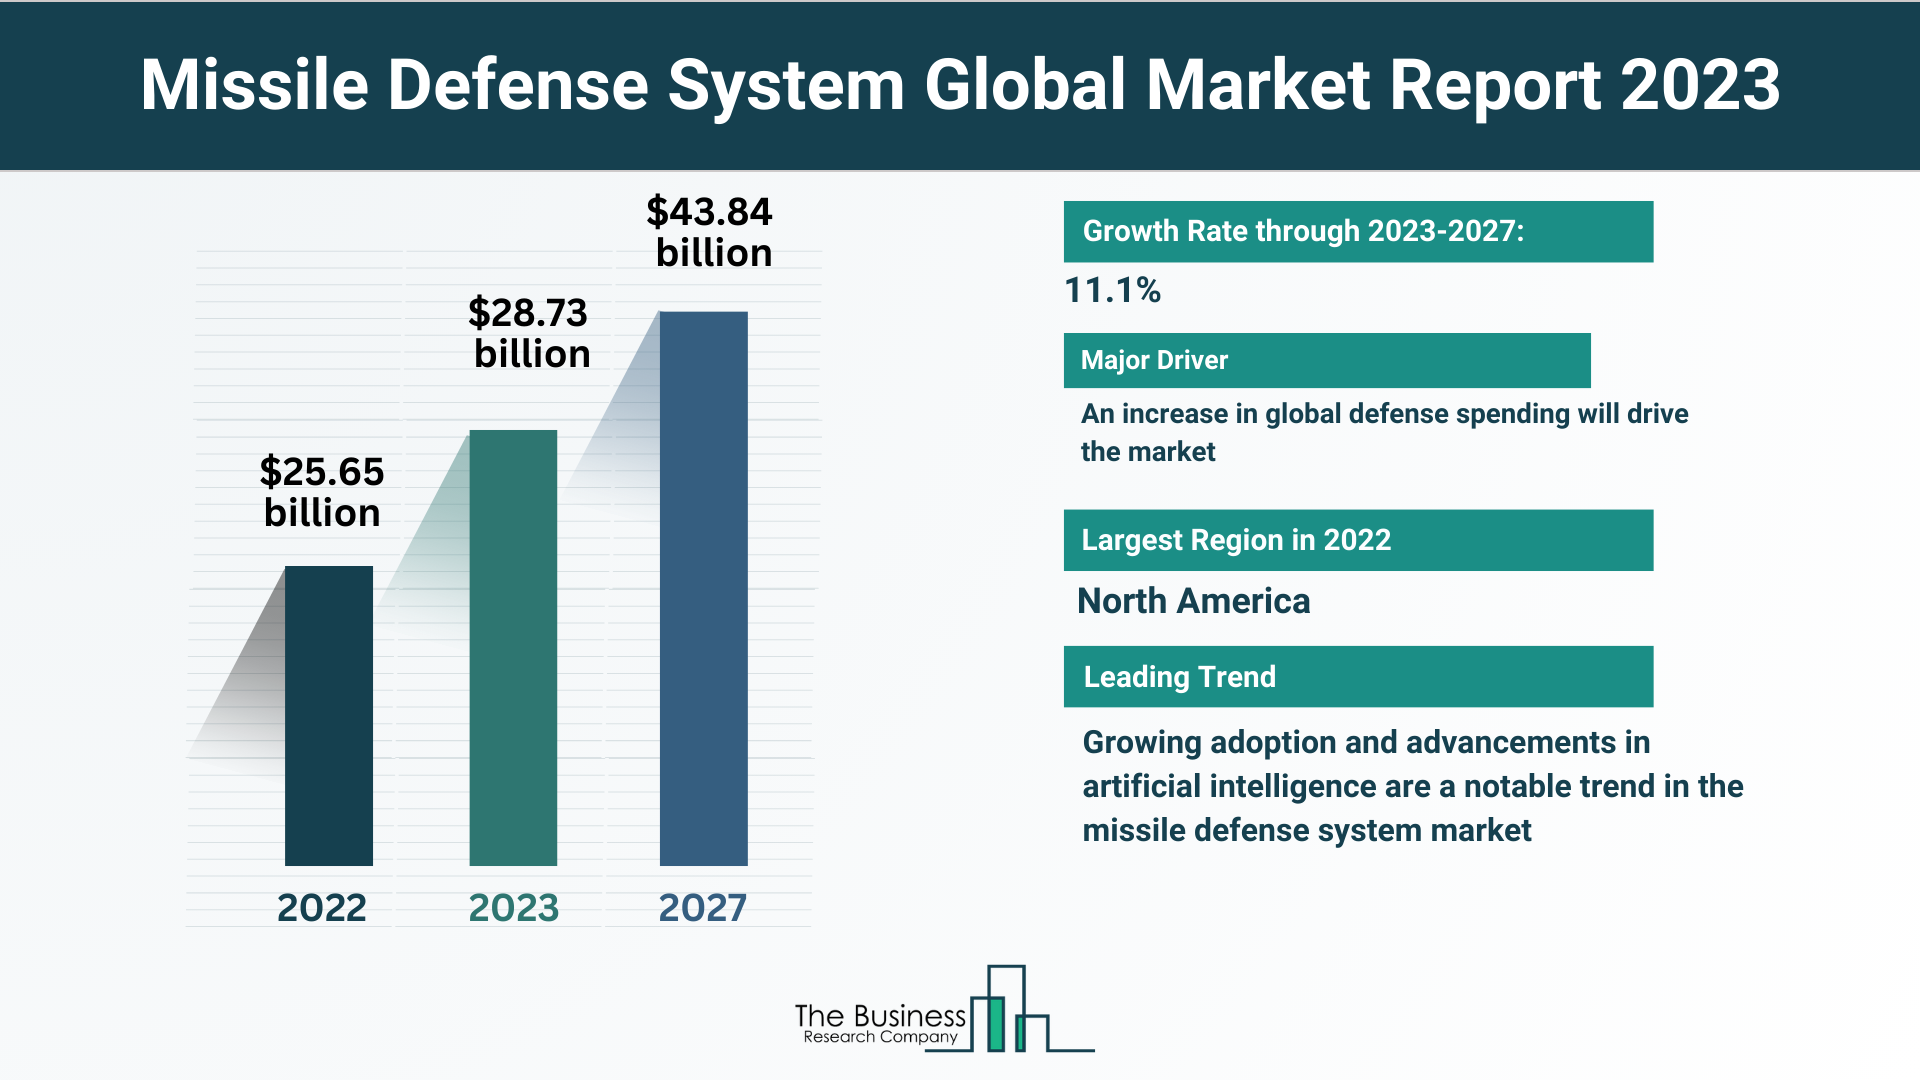 How Will Missile Defense System Market Grow Through 2023-2032?